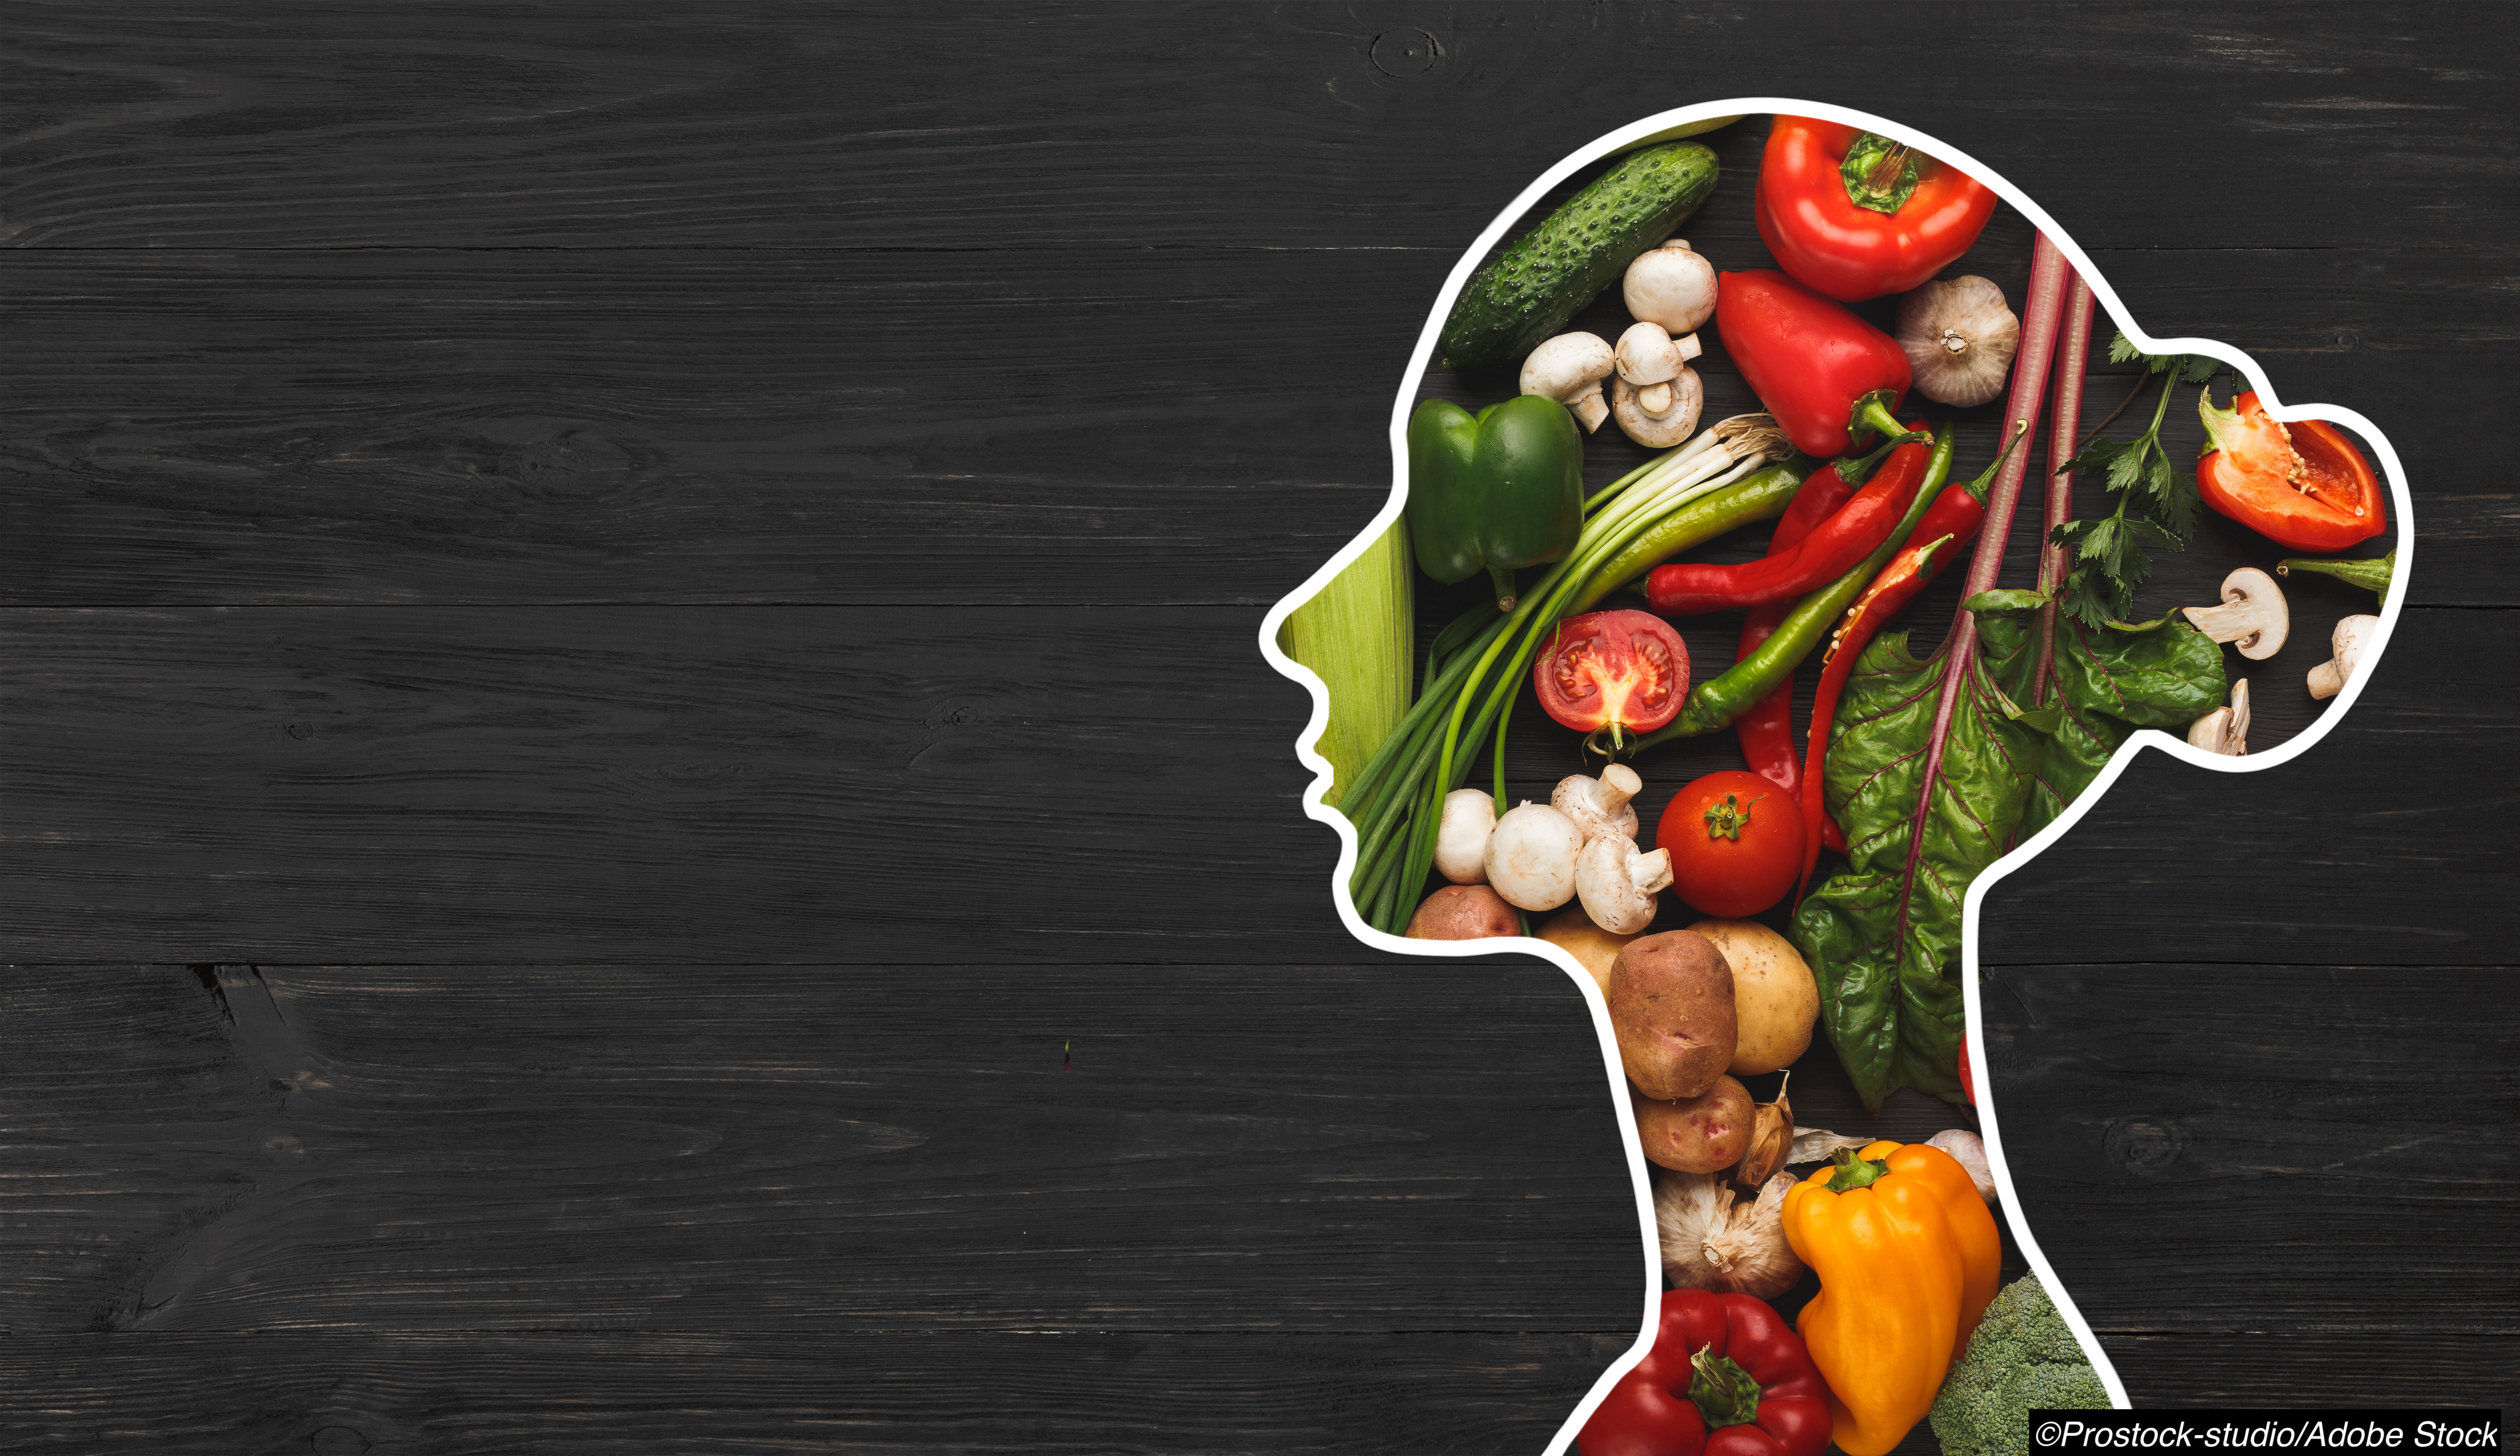 Are Inflammatory Foods Drivers of Late-Life Cognitive Decline?